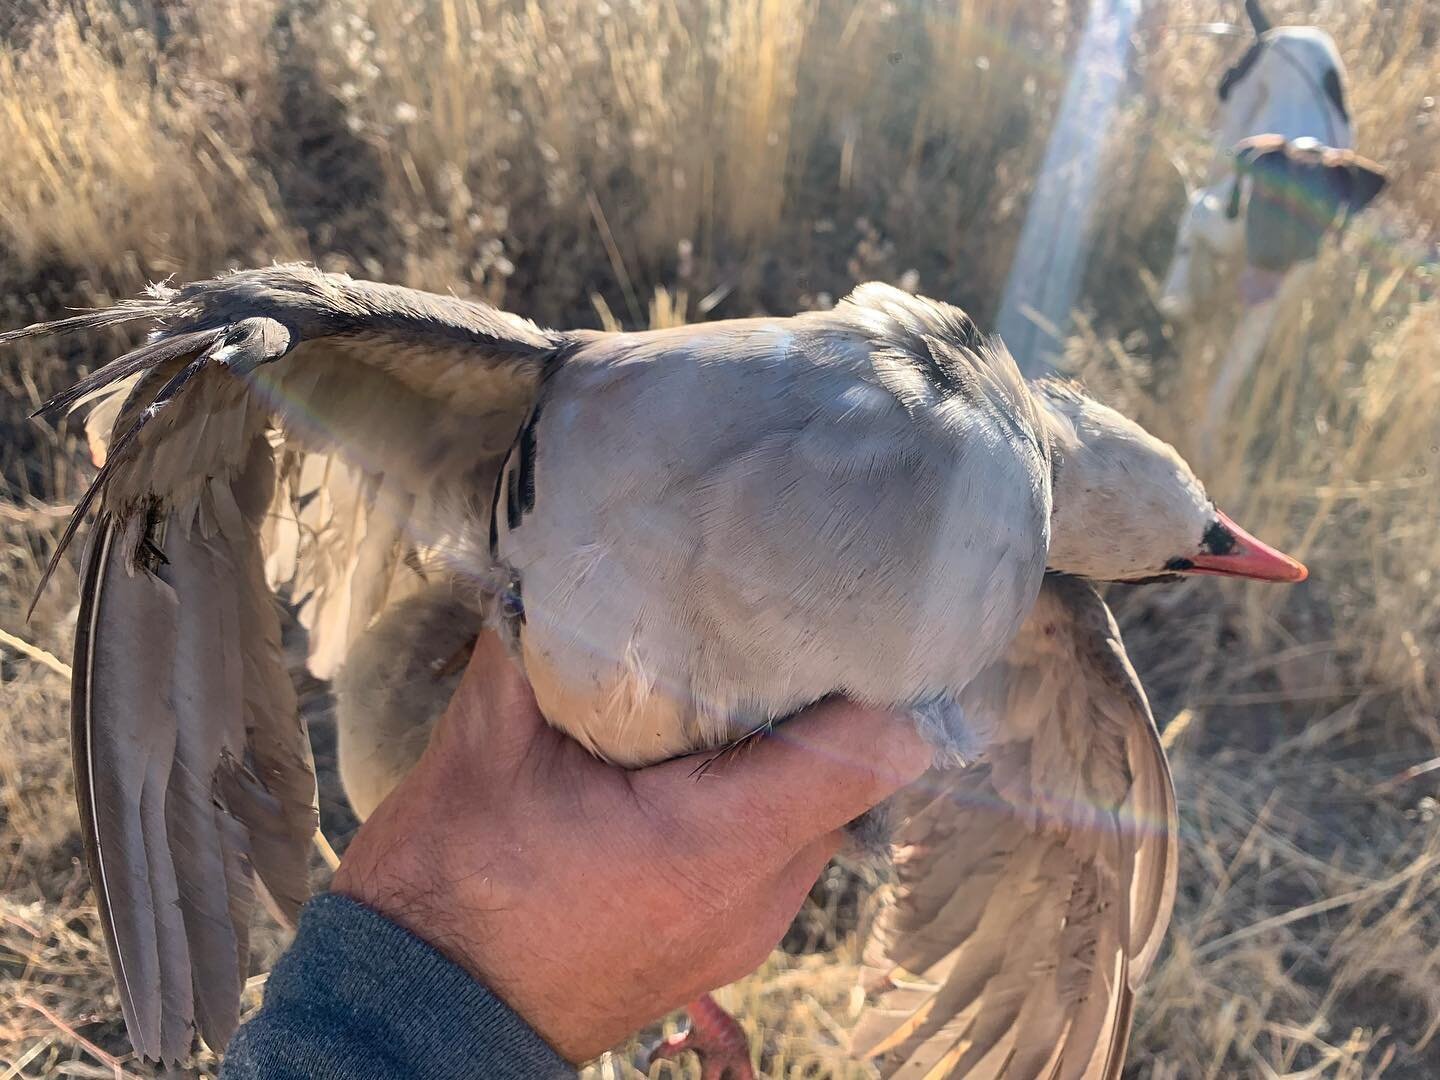 That Prey Drive&mdash;&ldquo;Desire for game is what will keep a dog hunting. It&rsquo;s what keeps them focused, intent and keeps them going&rdquo; &mdash; R. Smith @ronniesmithkennels 

#chukar #chukarchasers #Birders #preydrive #motivated #focused